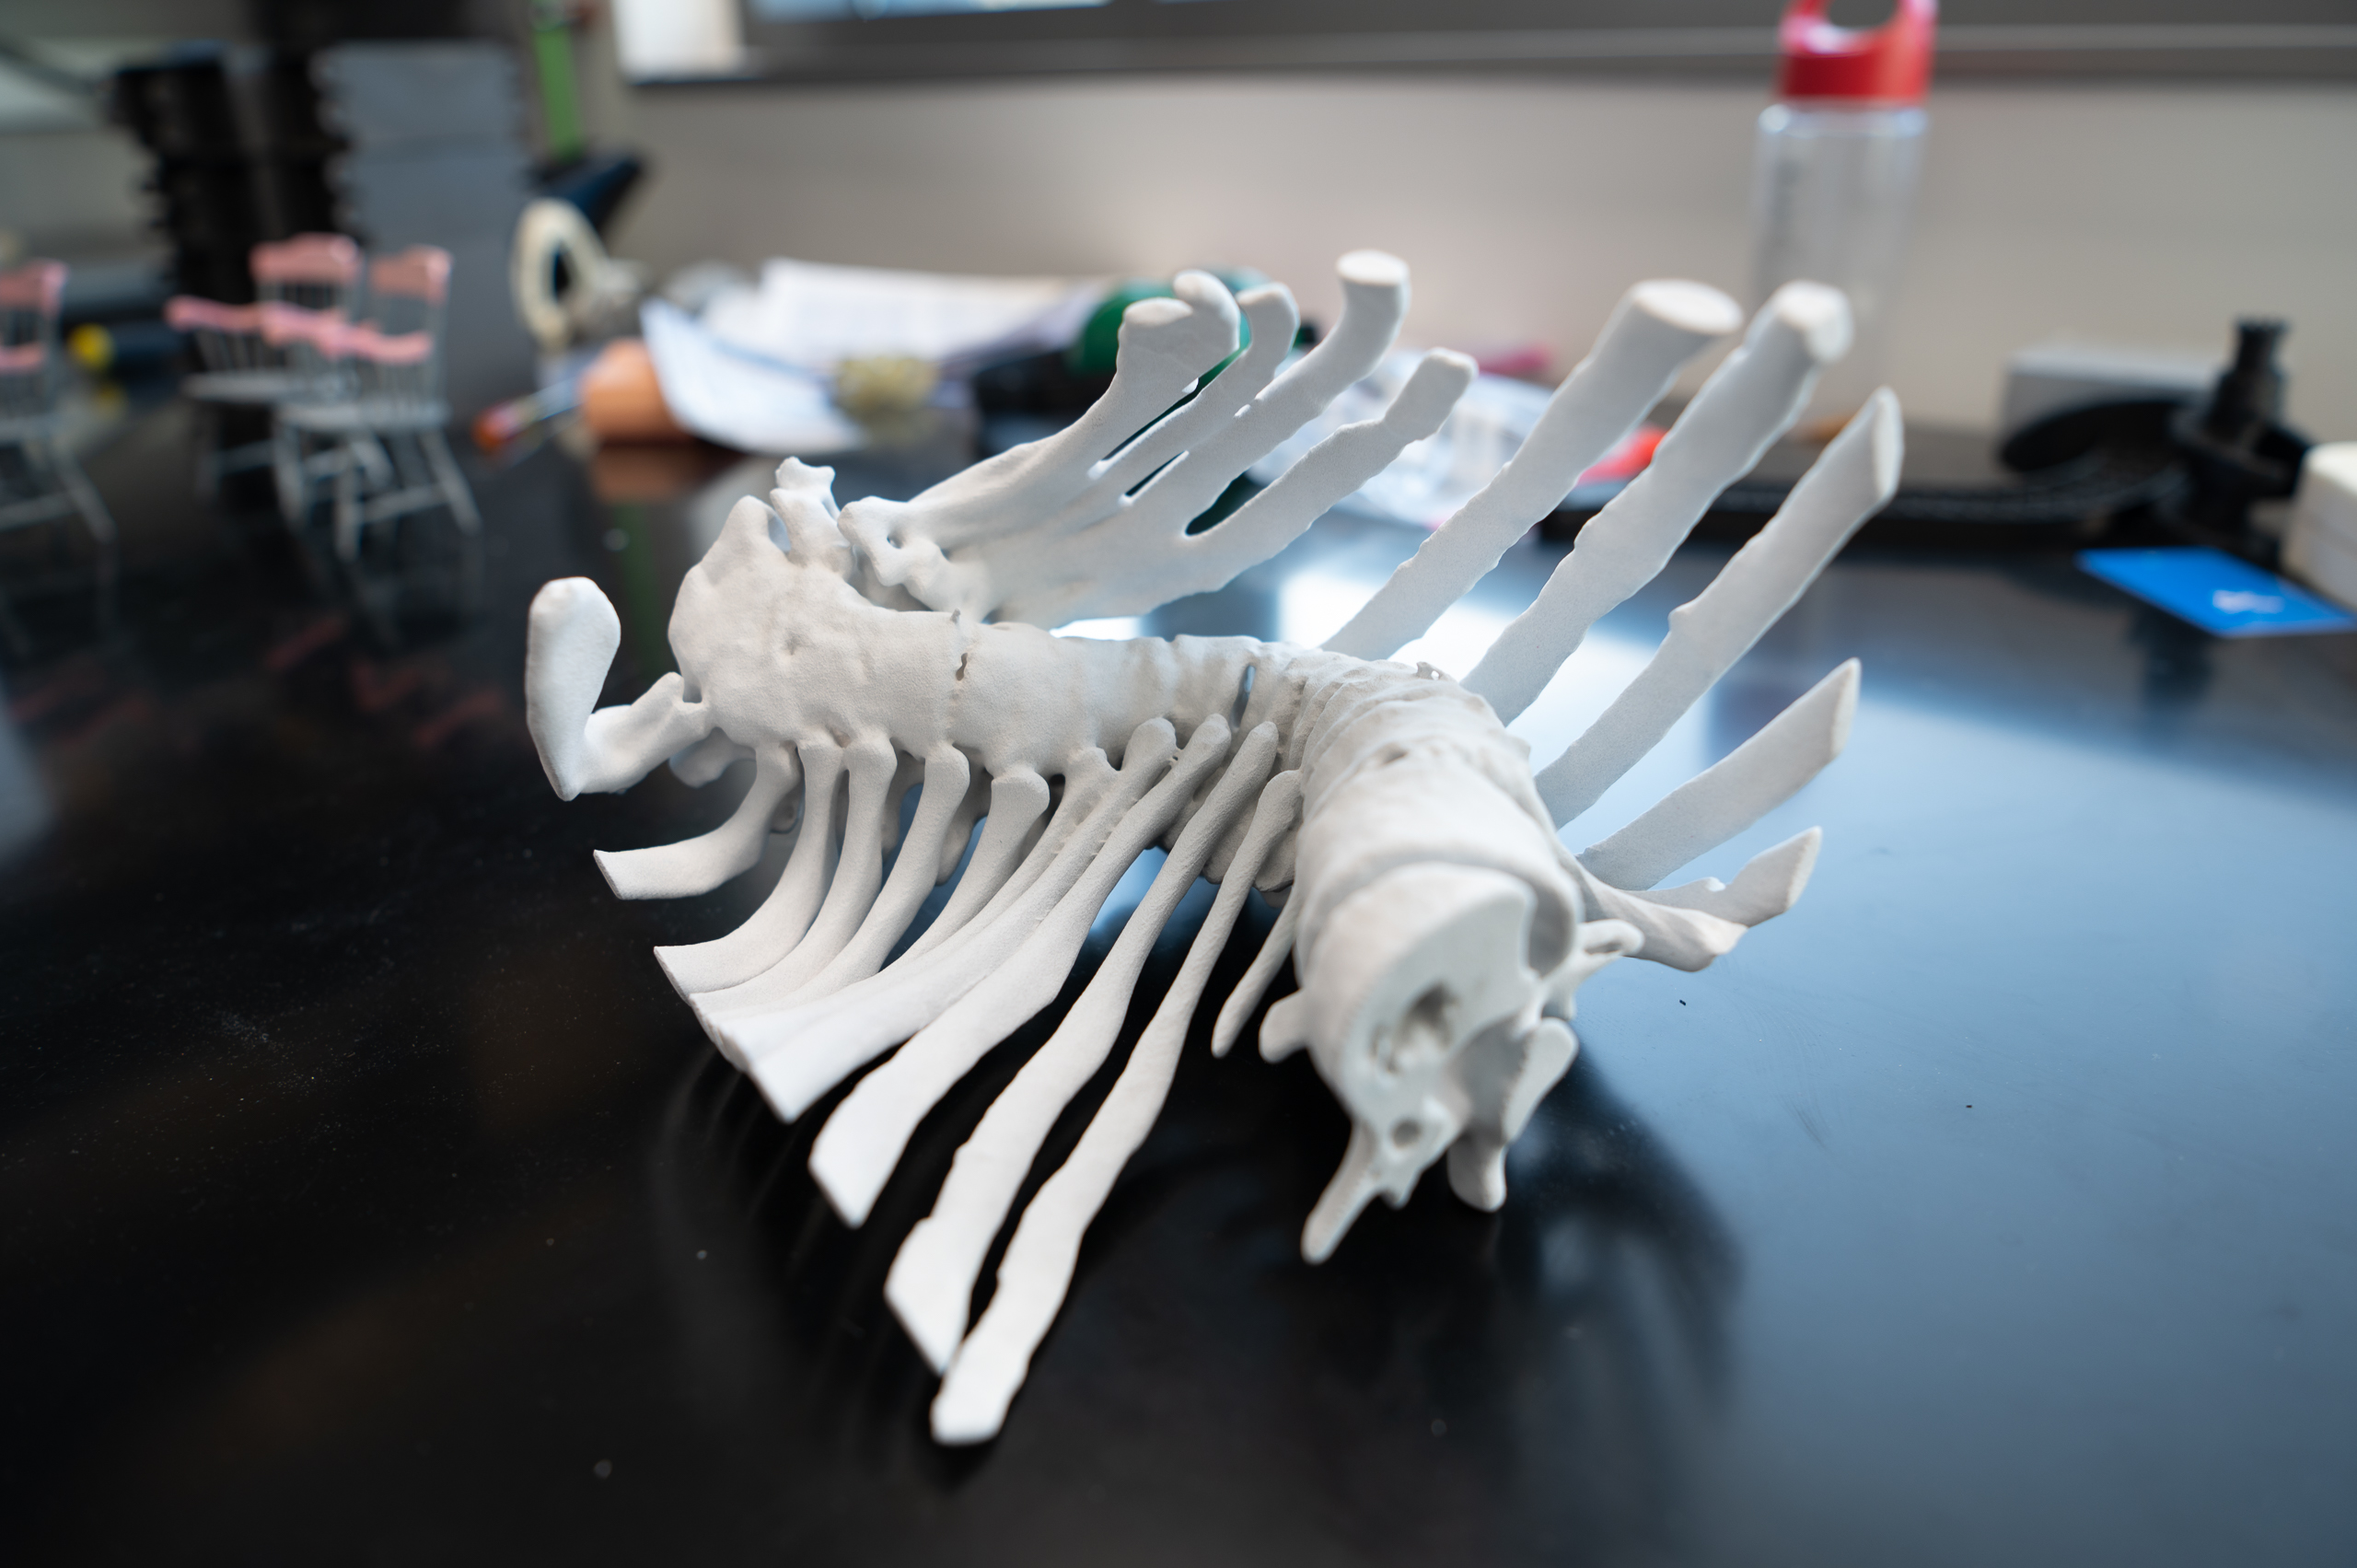 3D printed model of the spine of a patient with severe scoliosis.